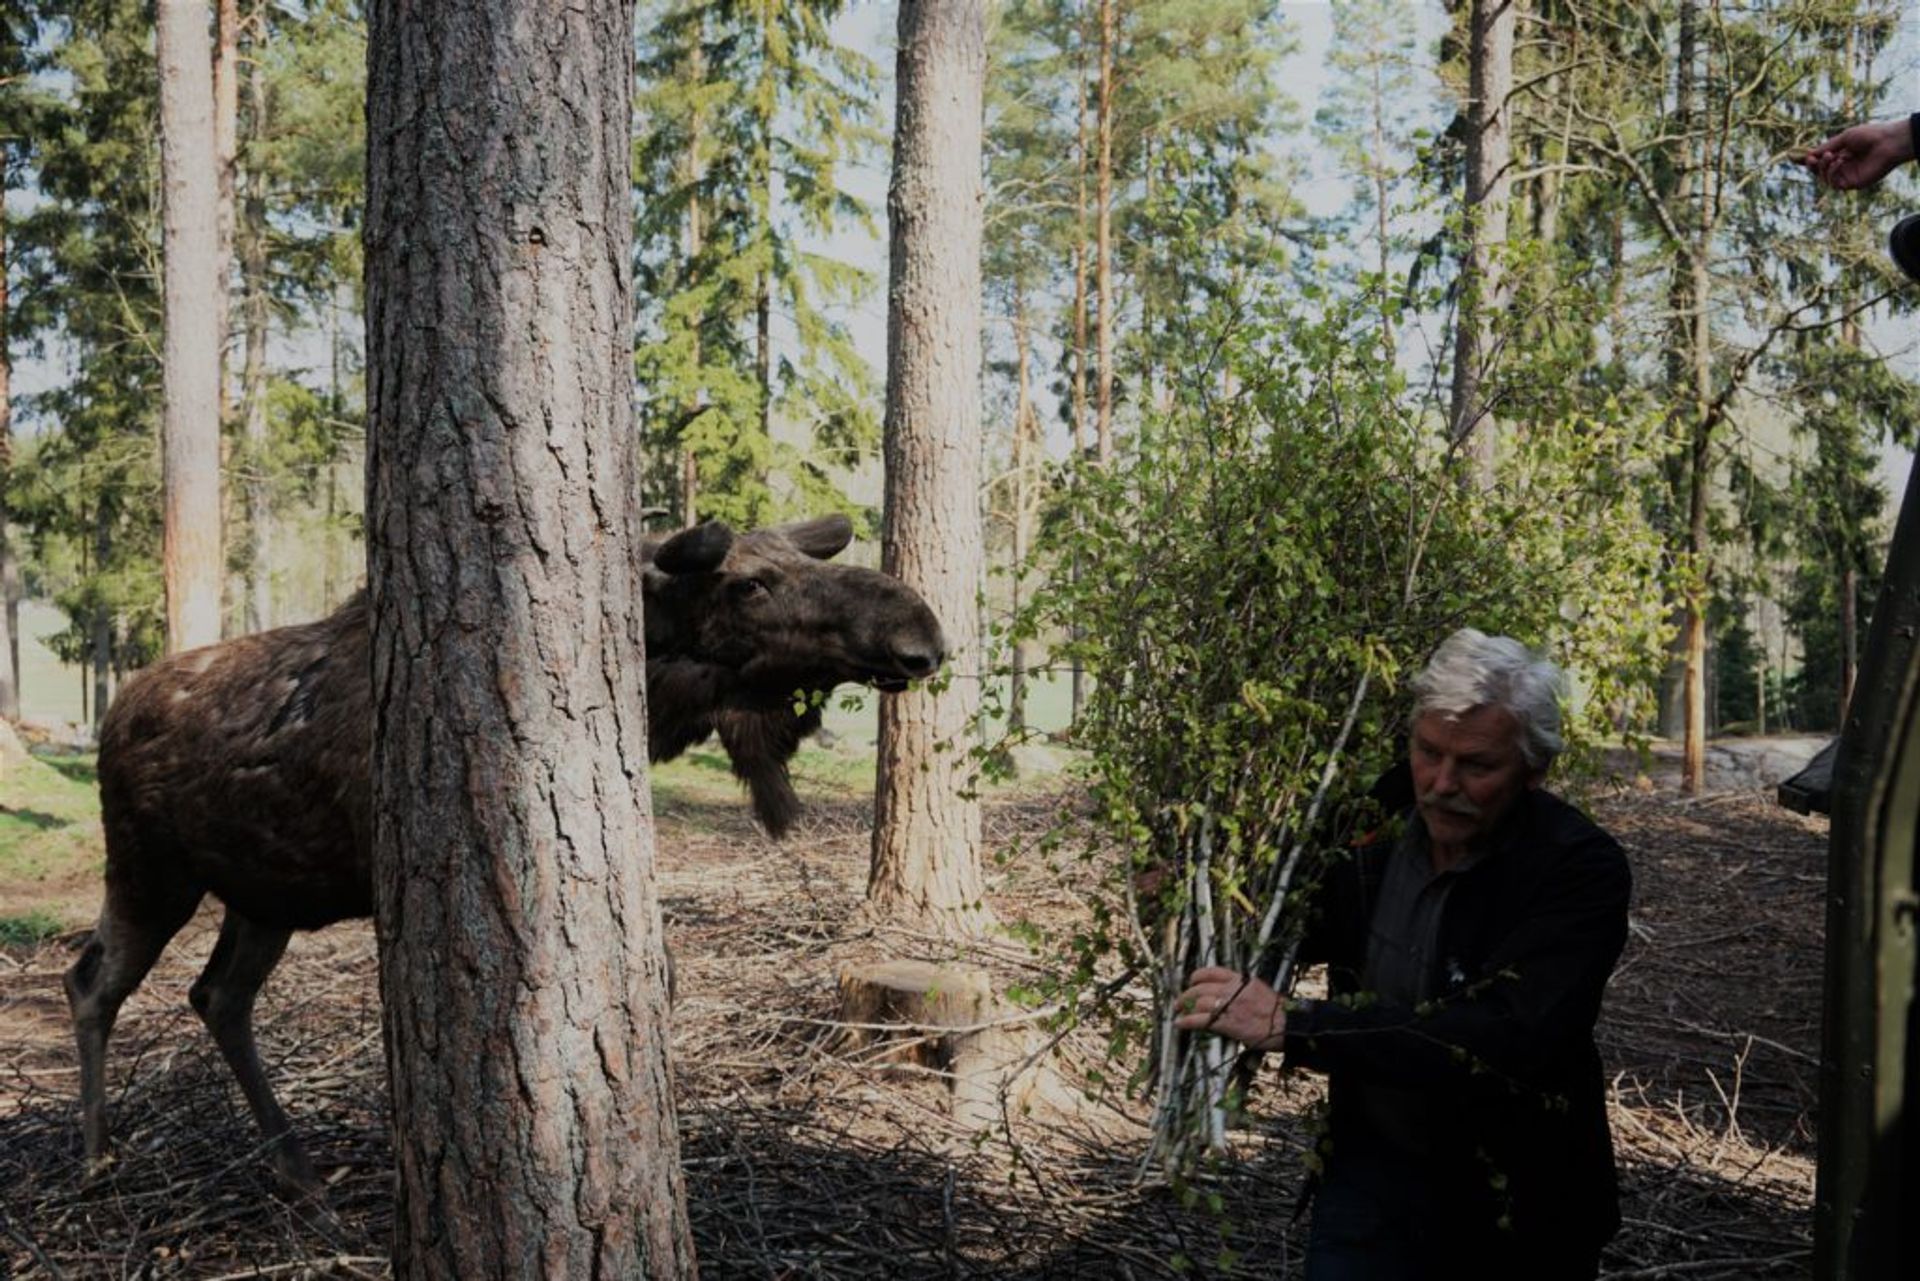 A person carrying branches to a moose.